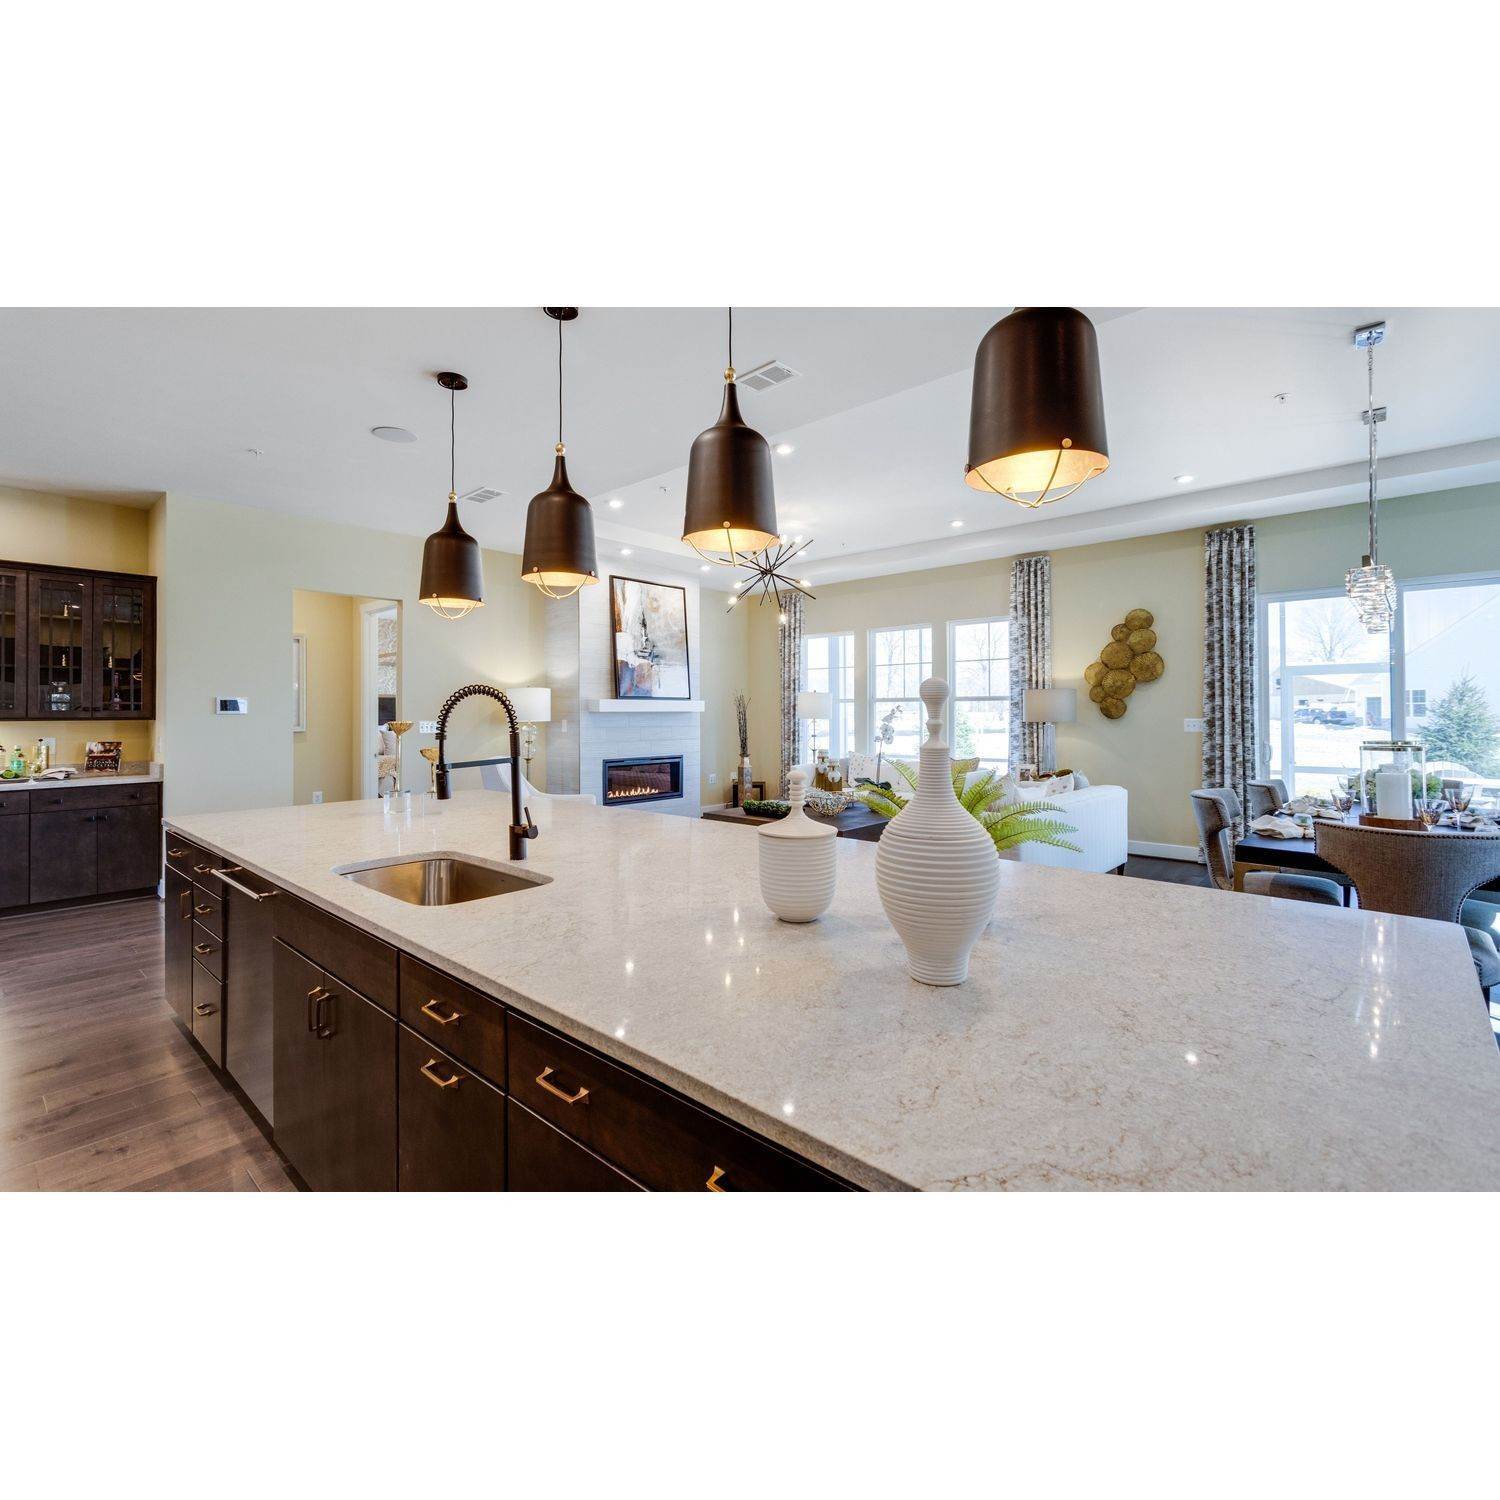 19. Single Family for Sale at K. Hovnanian's® Four Seasons At Kent Island - Sing 203 Bayberry Drive, Chester, MD 21619